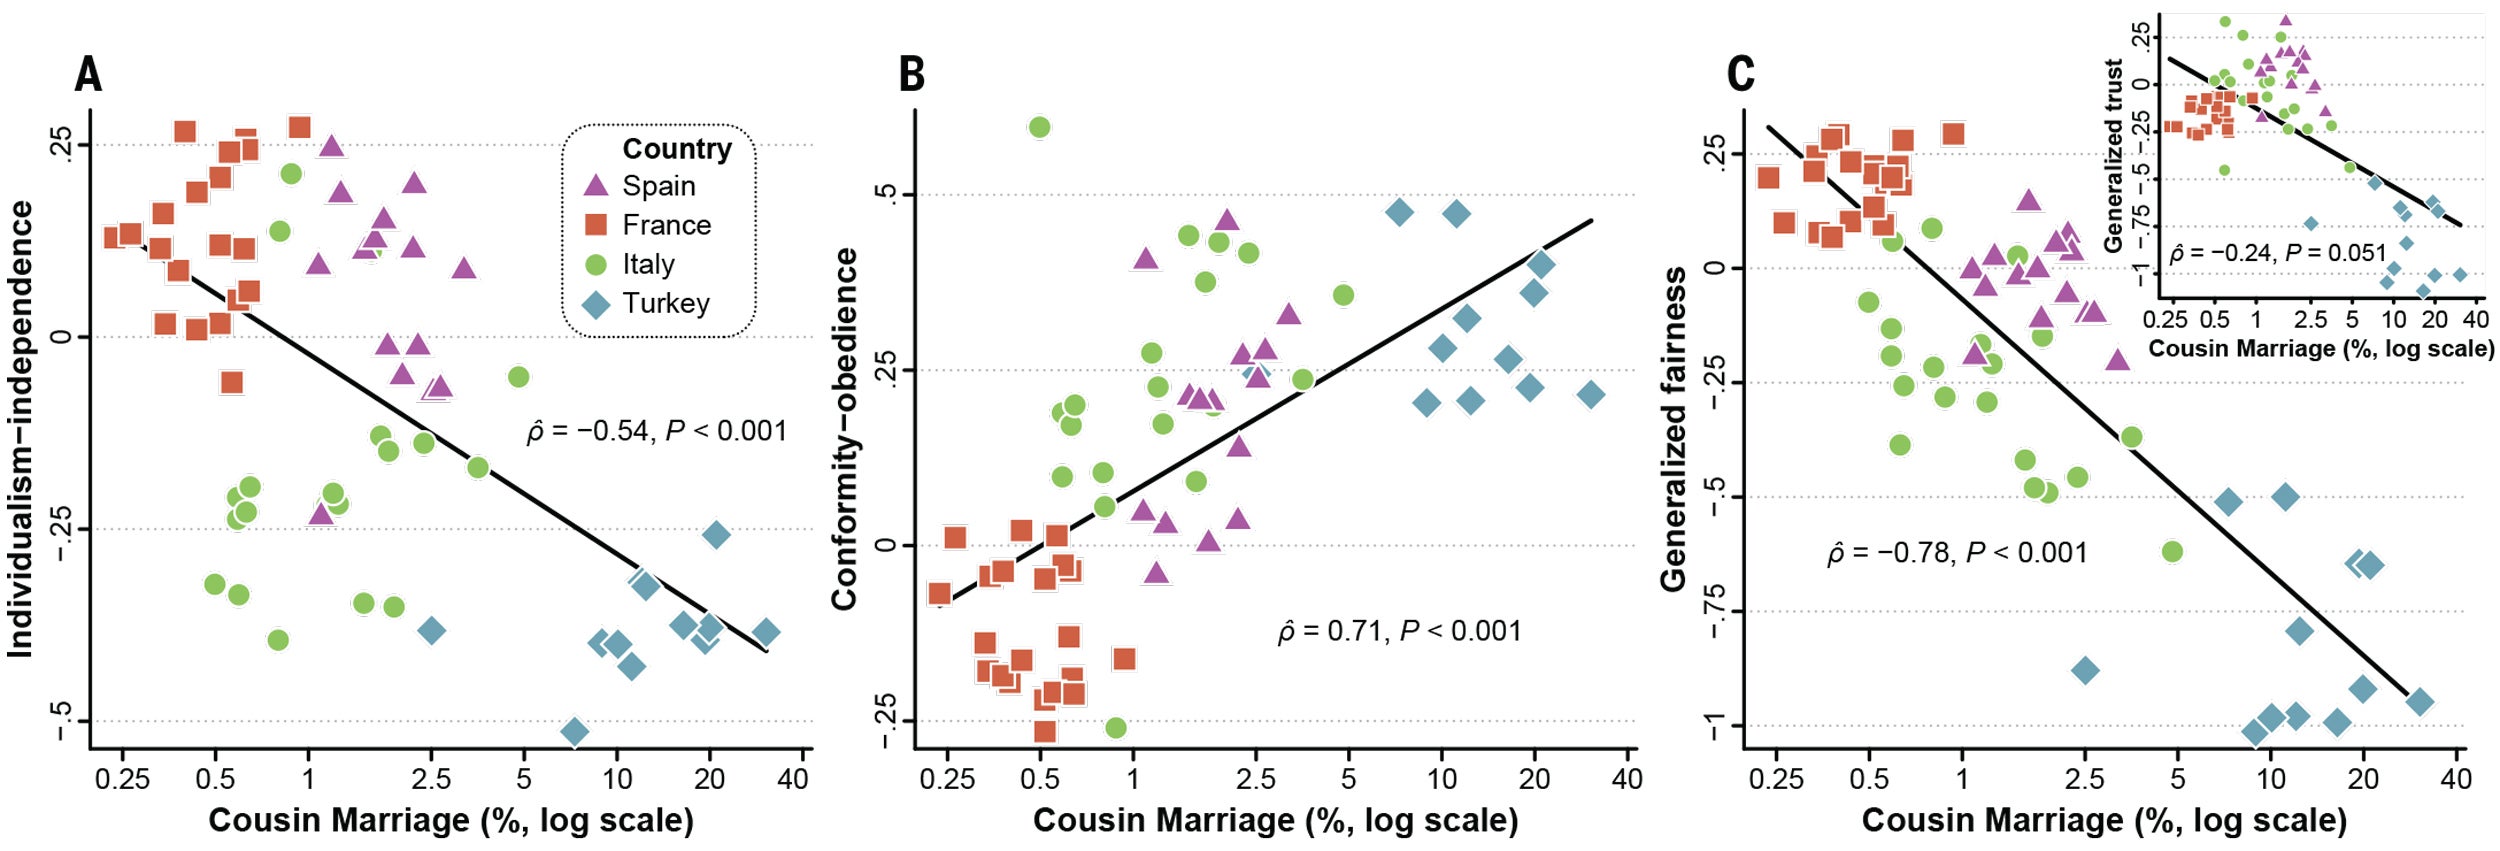 Graph showing relationship between kin marriage and traits such as individualism and obedience in Spain, France, Italy, and Turkey.